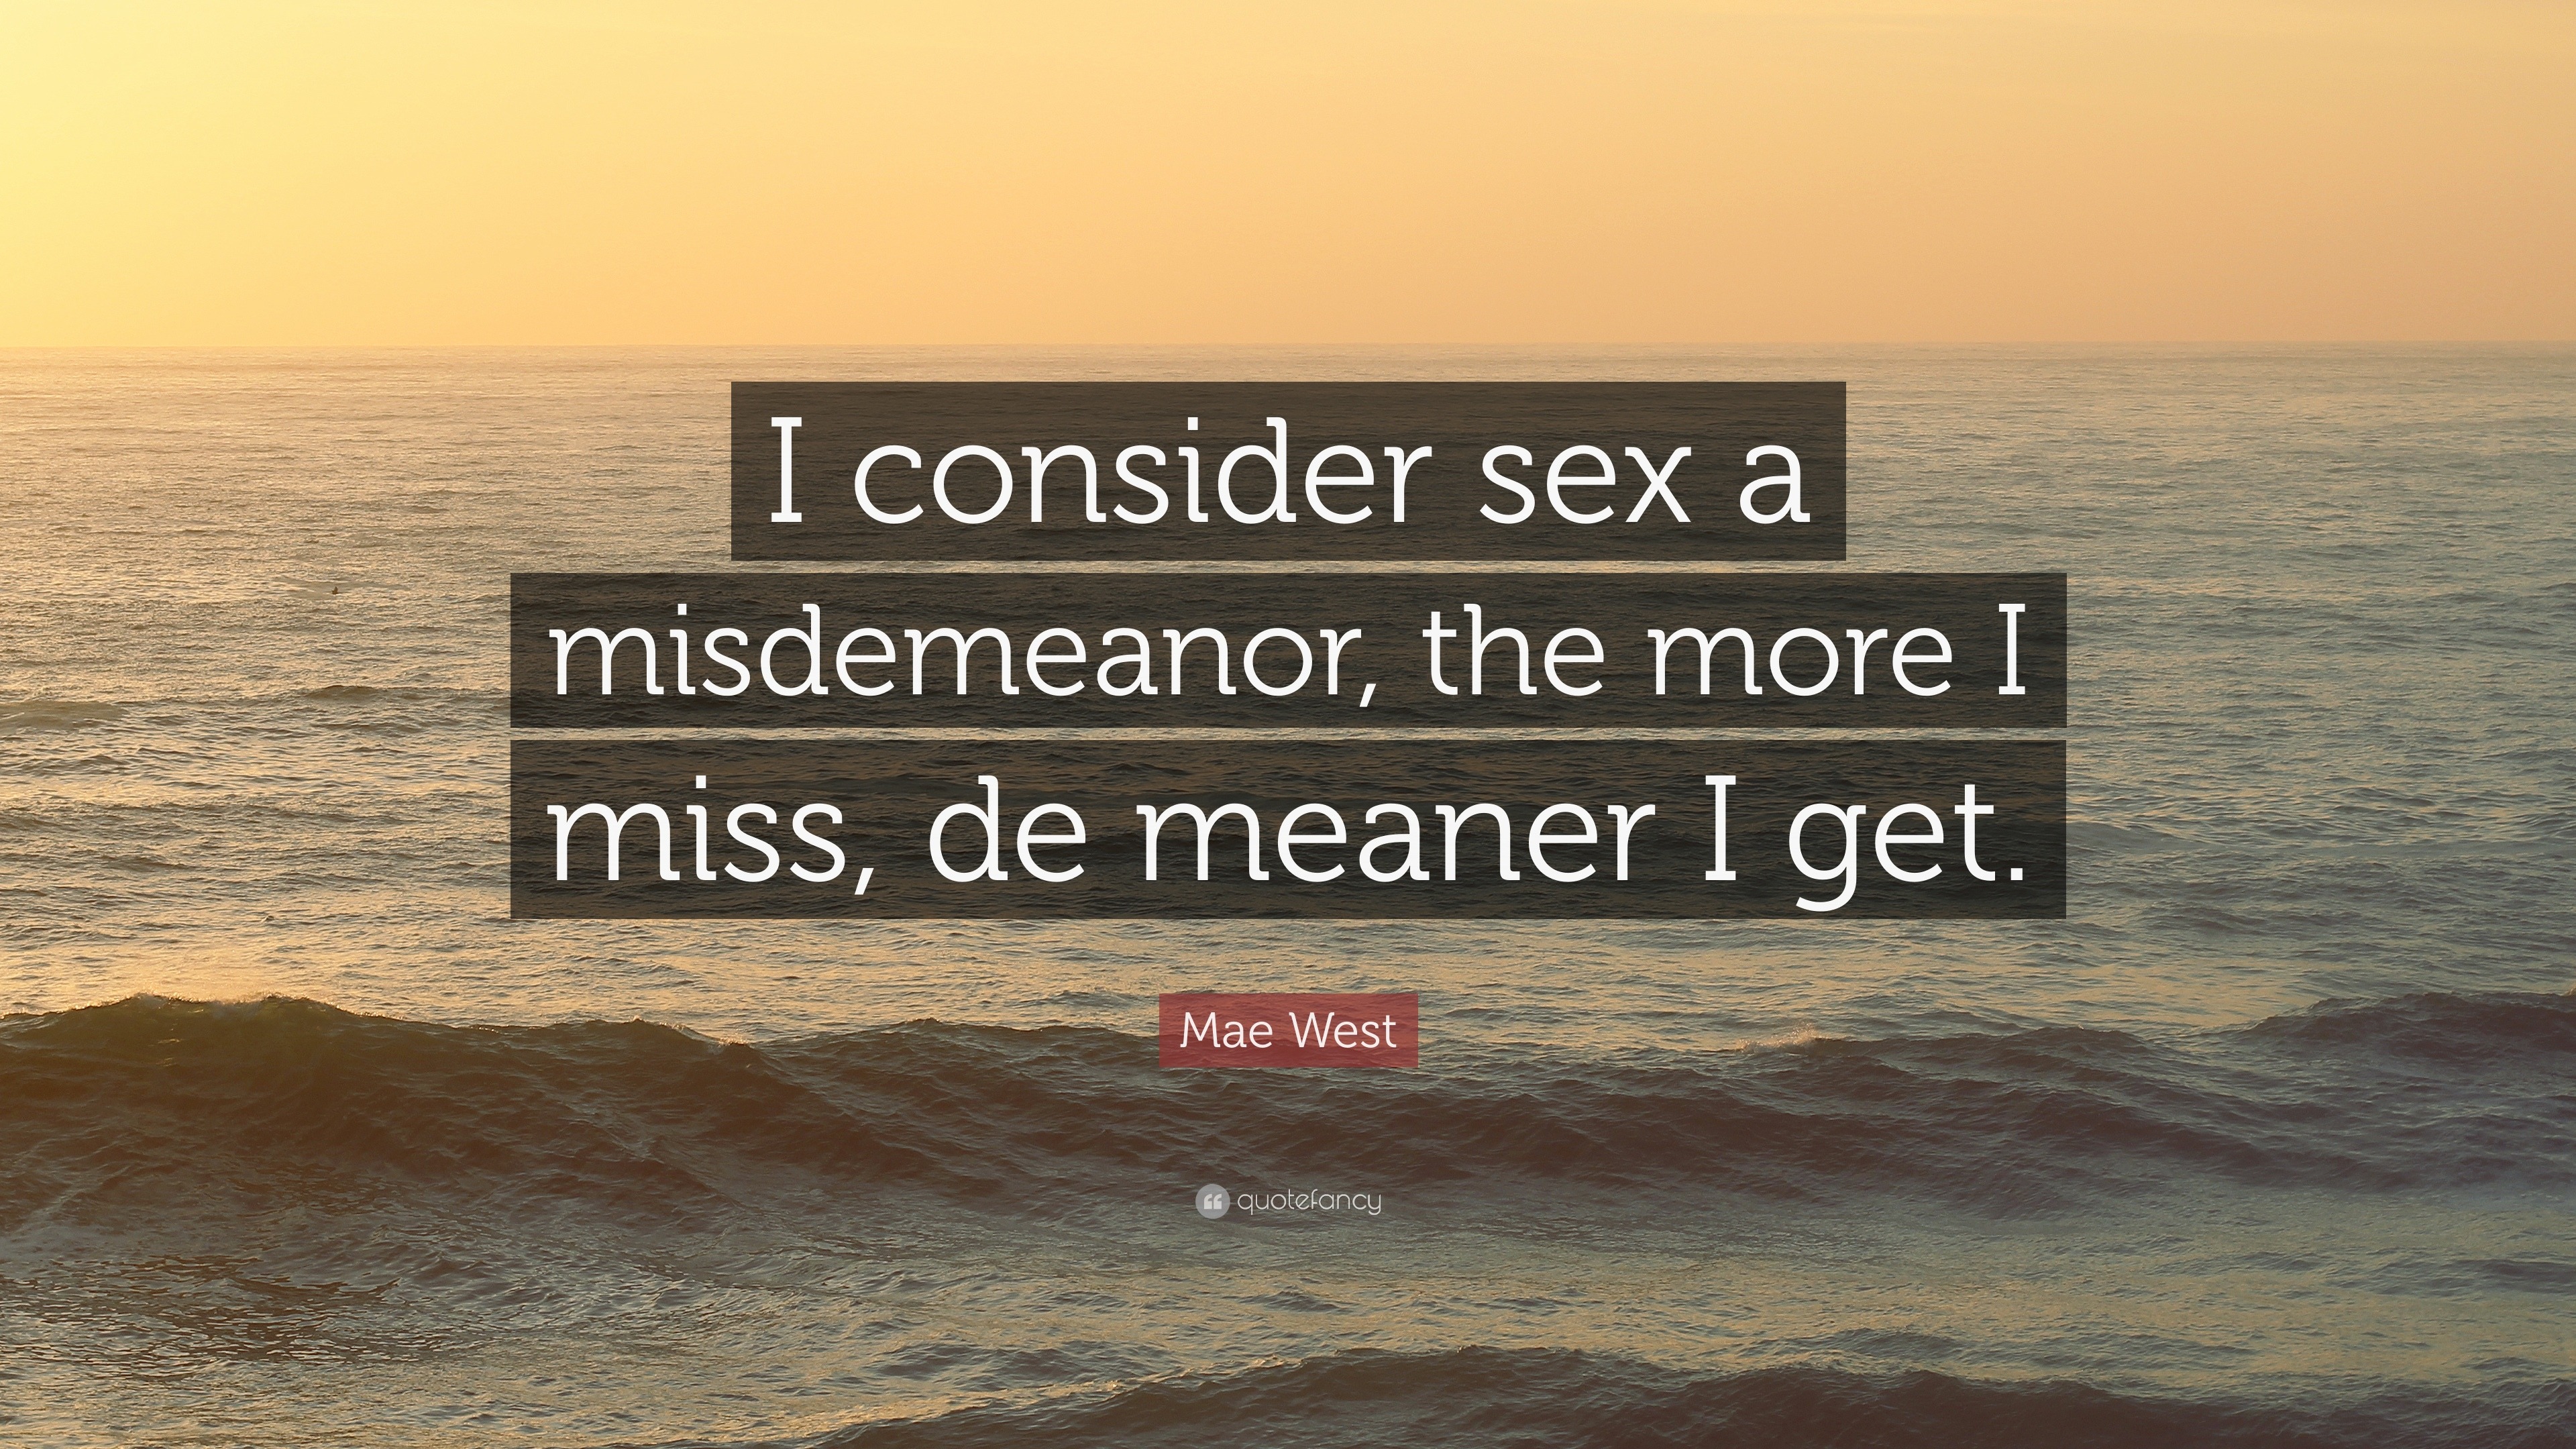 Mae West Quote “i Consider Sex A Misdemeanor The More I Miss De Meaner I Get ”